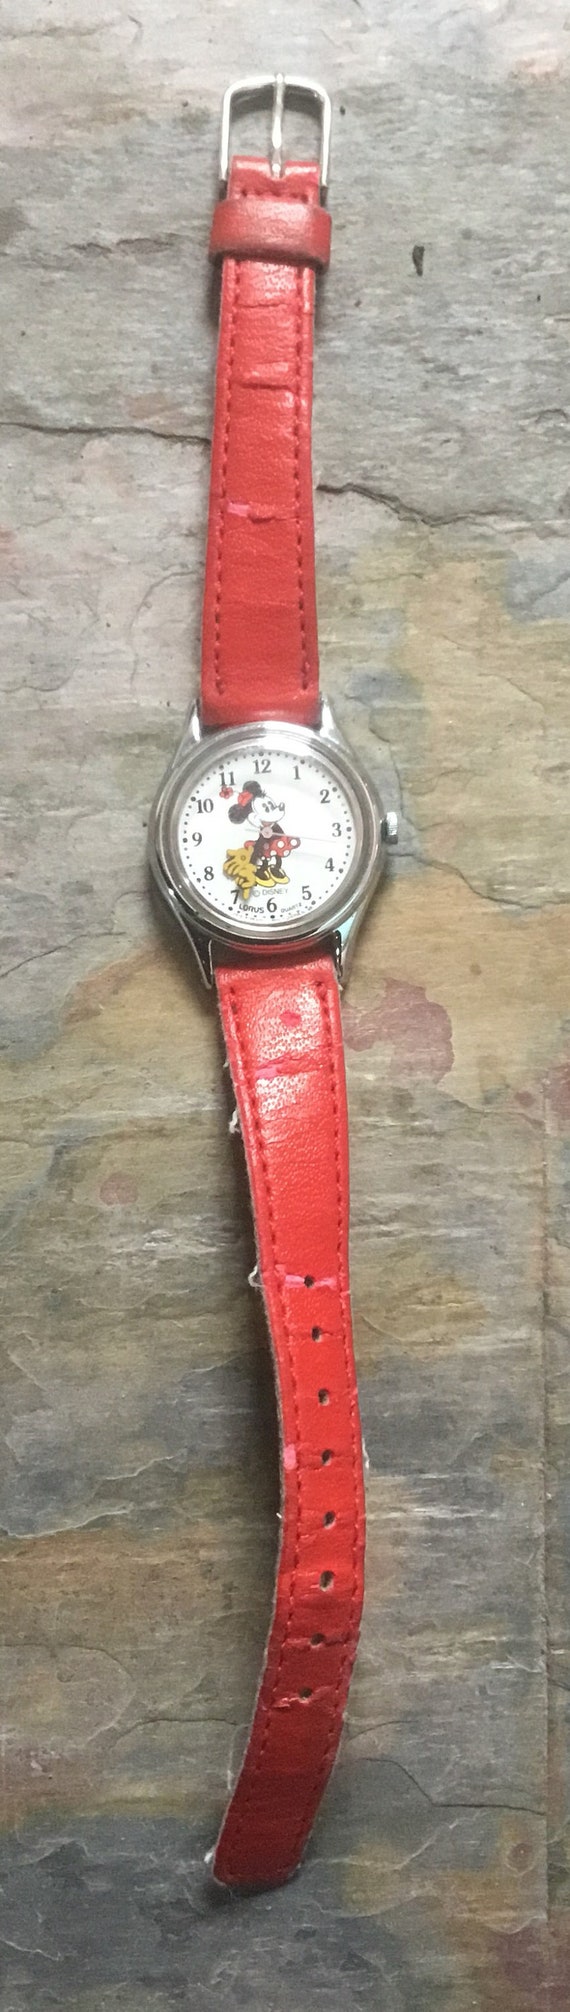 Vintage Disney Minnie Mouse Watch with Red Leather